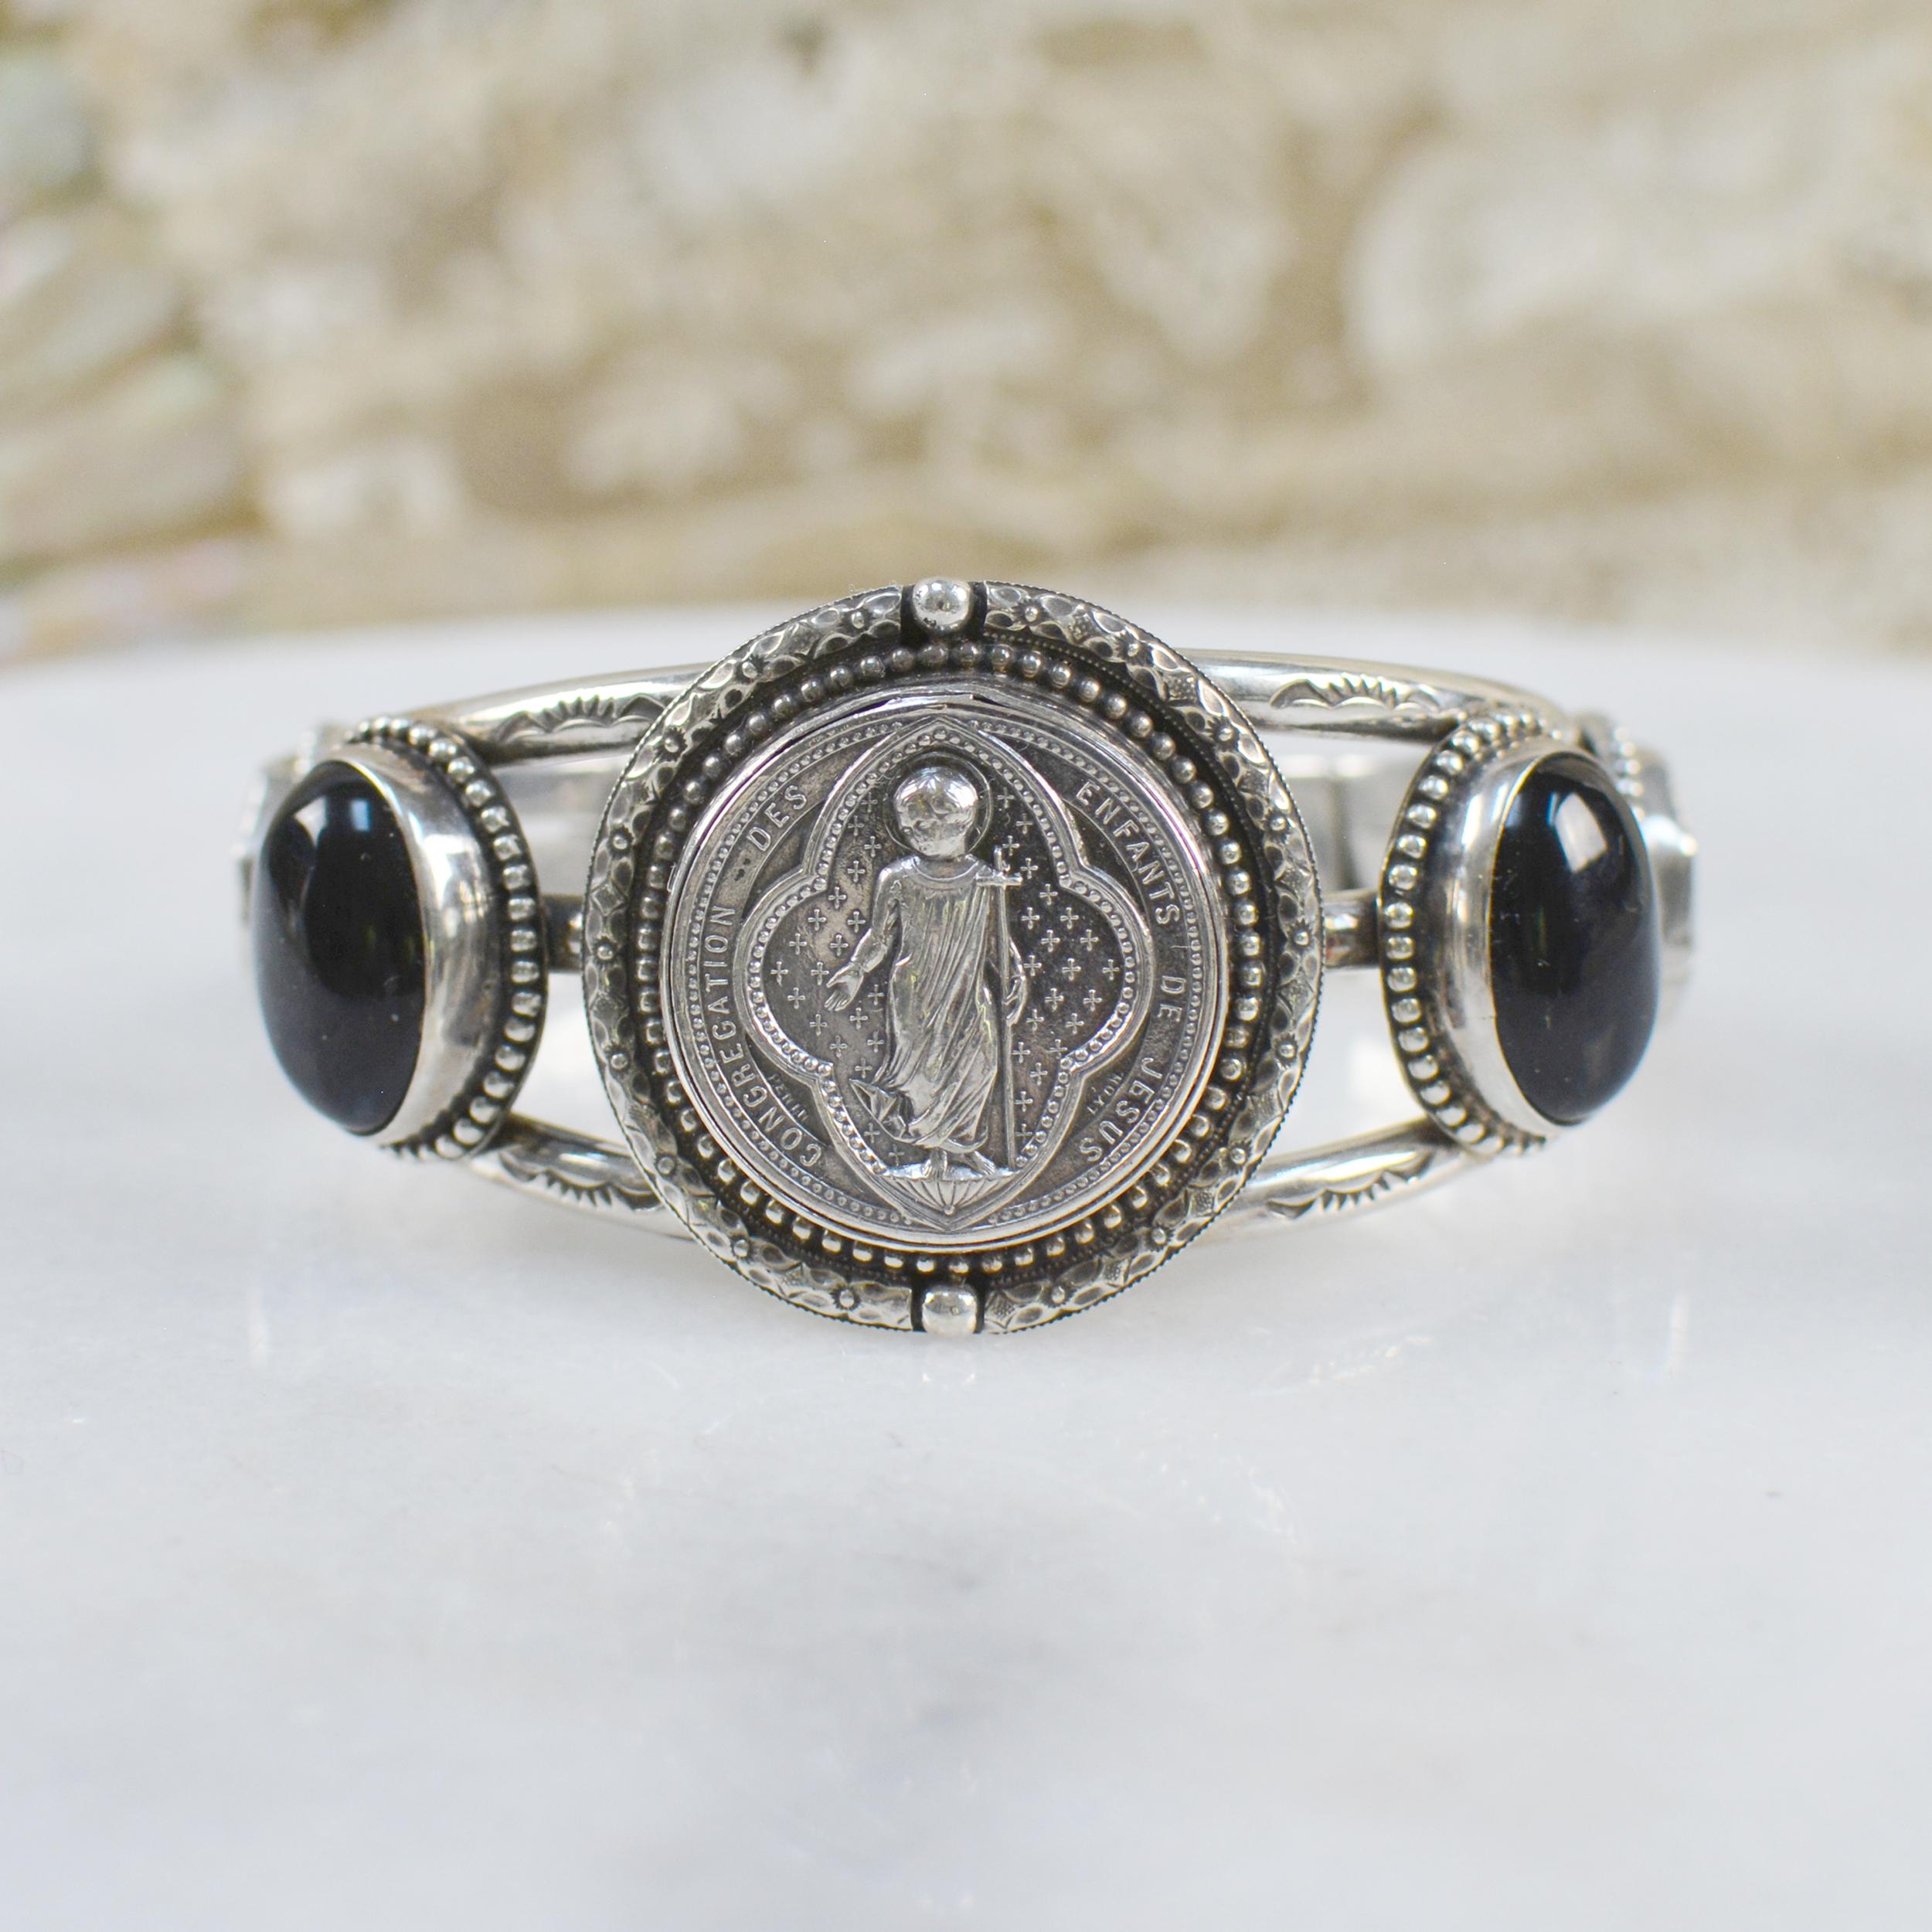 This one of a kind sterling silver Jill Garber cuff bracelet features a fine original antique nineteenth century French Sacred Heart Medal by engraver  Ludovic Penin, depicting the Christ child. Ludovic Penin 1830 - 1868, French master engraver was